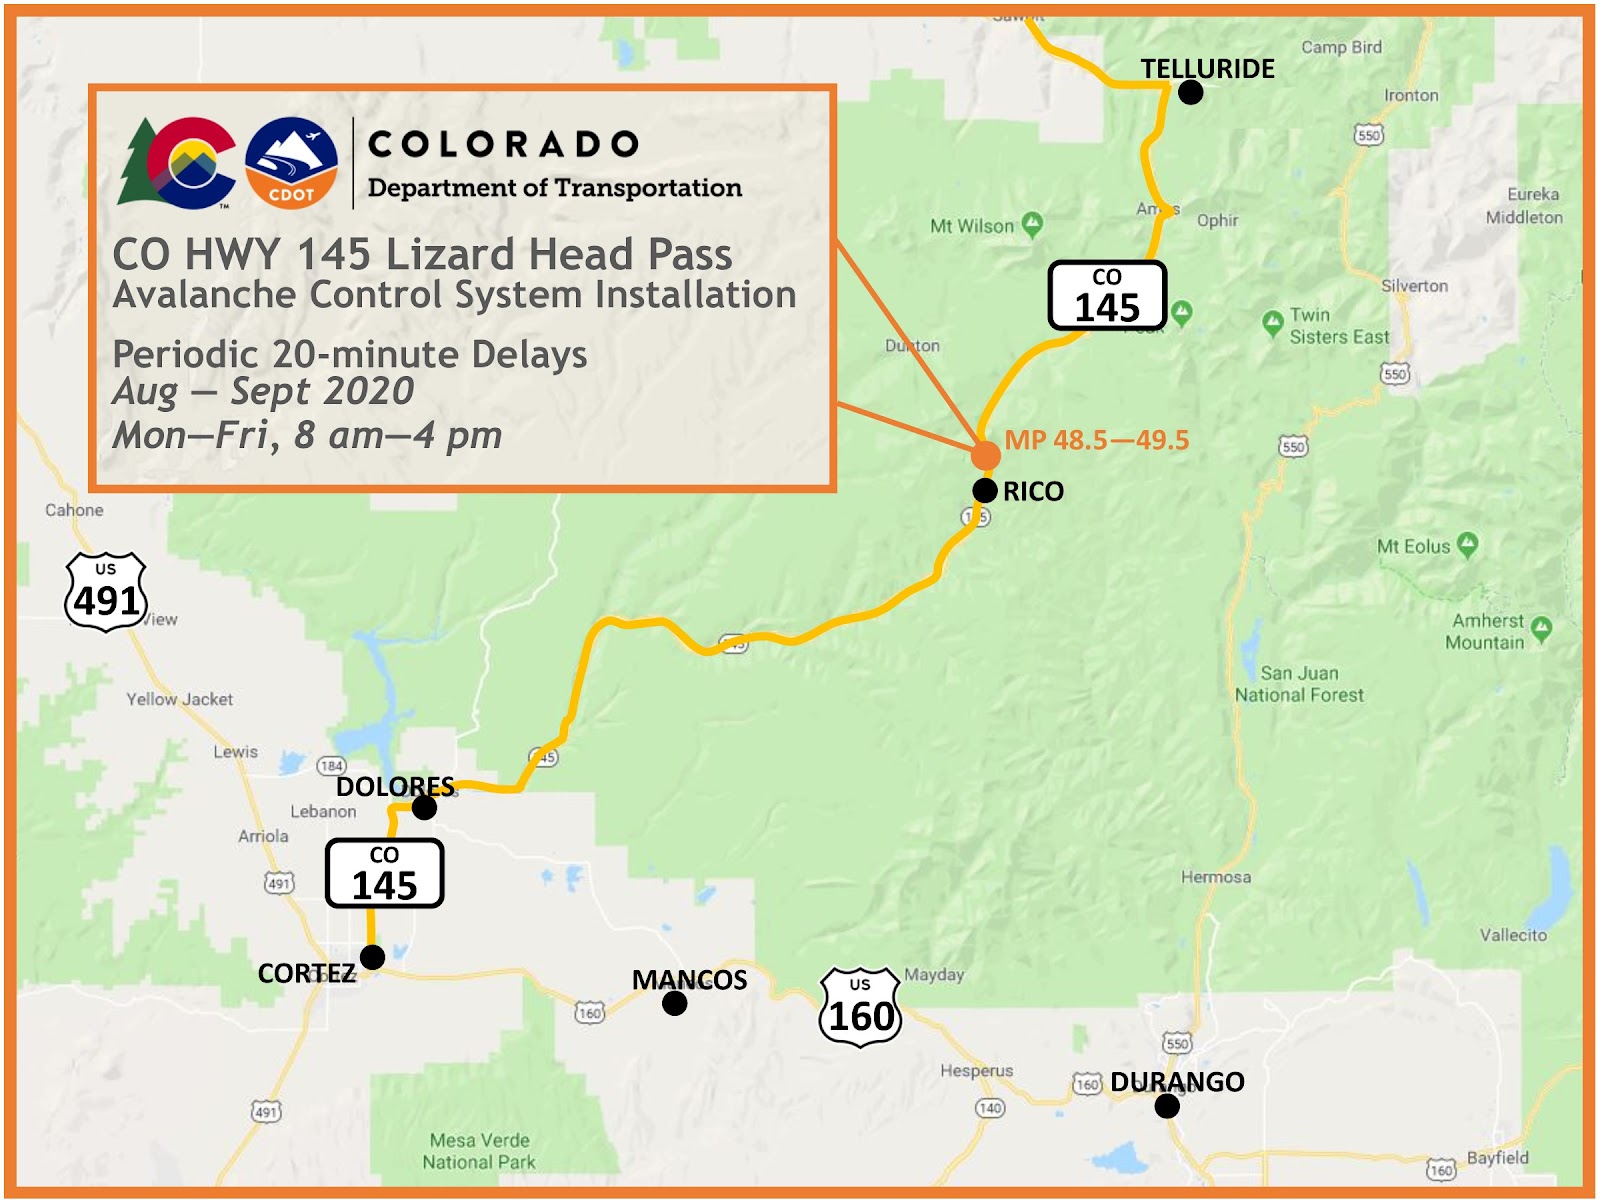 Map of CO 145 Lizard Head Pass, showing construction area about 1 mile north of Rico (mile points 48.5 - 49.5)